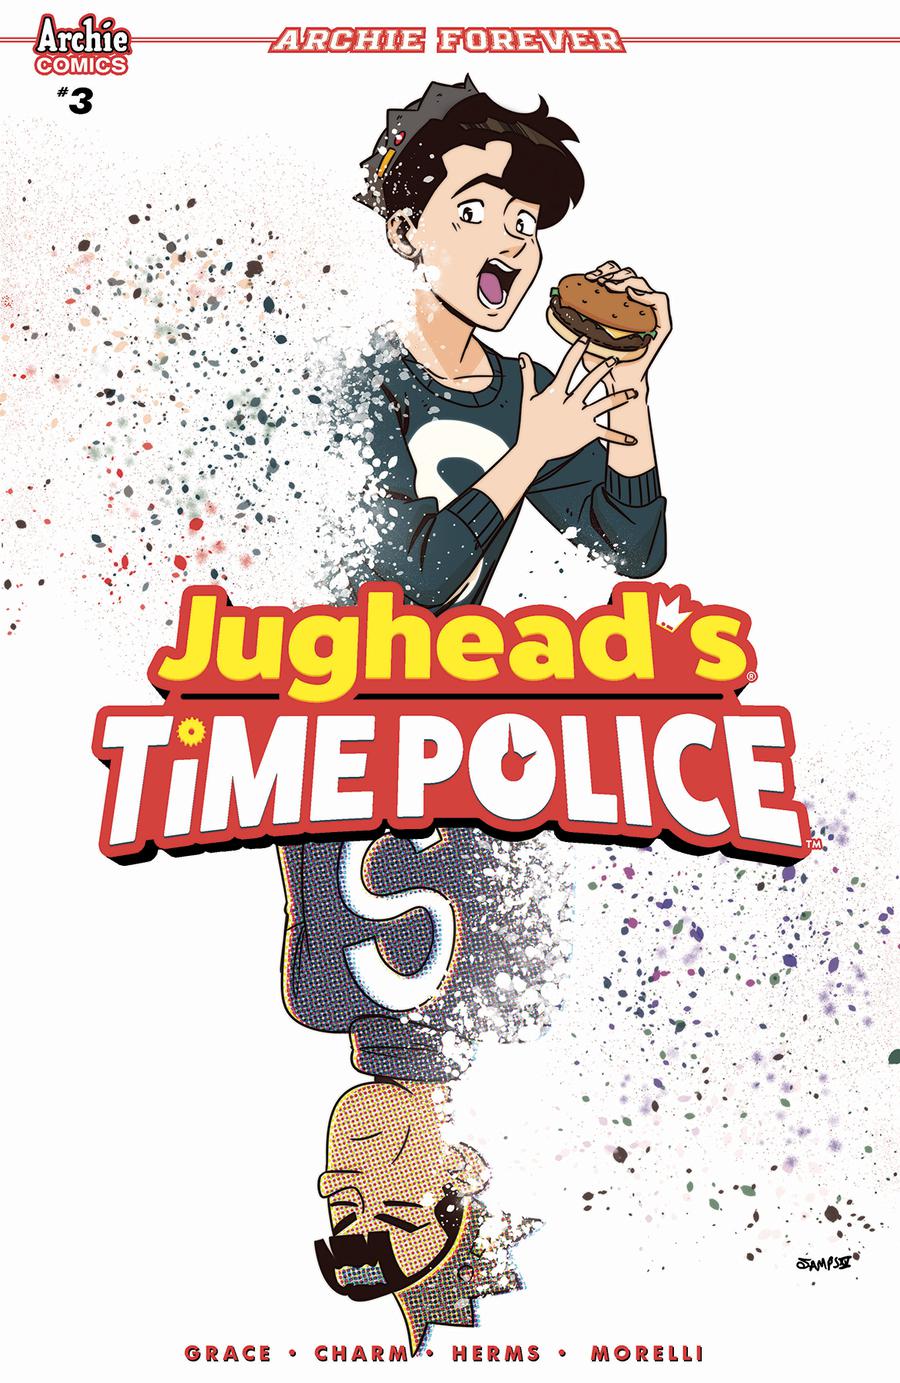 Jugheads Time Police Vol 2 #3 Cover B Variant Ryan Jampole Cover